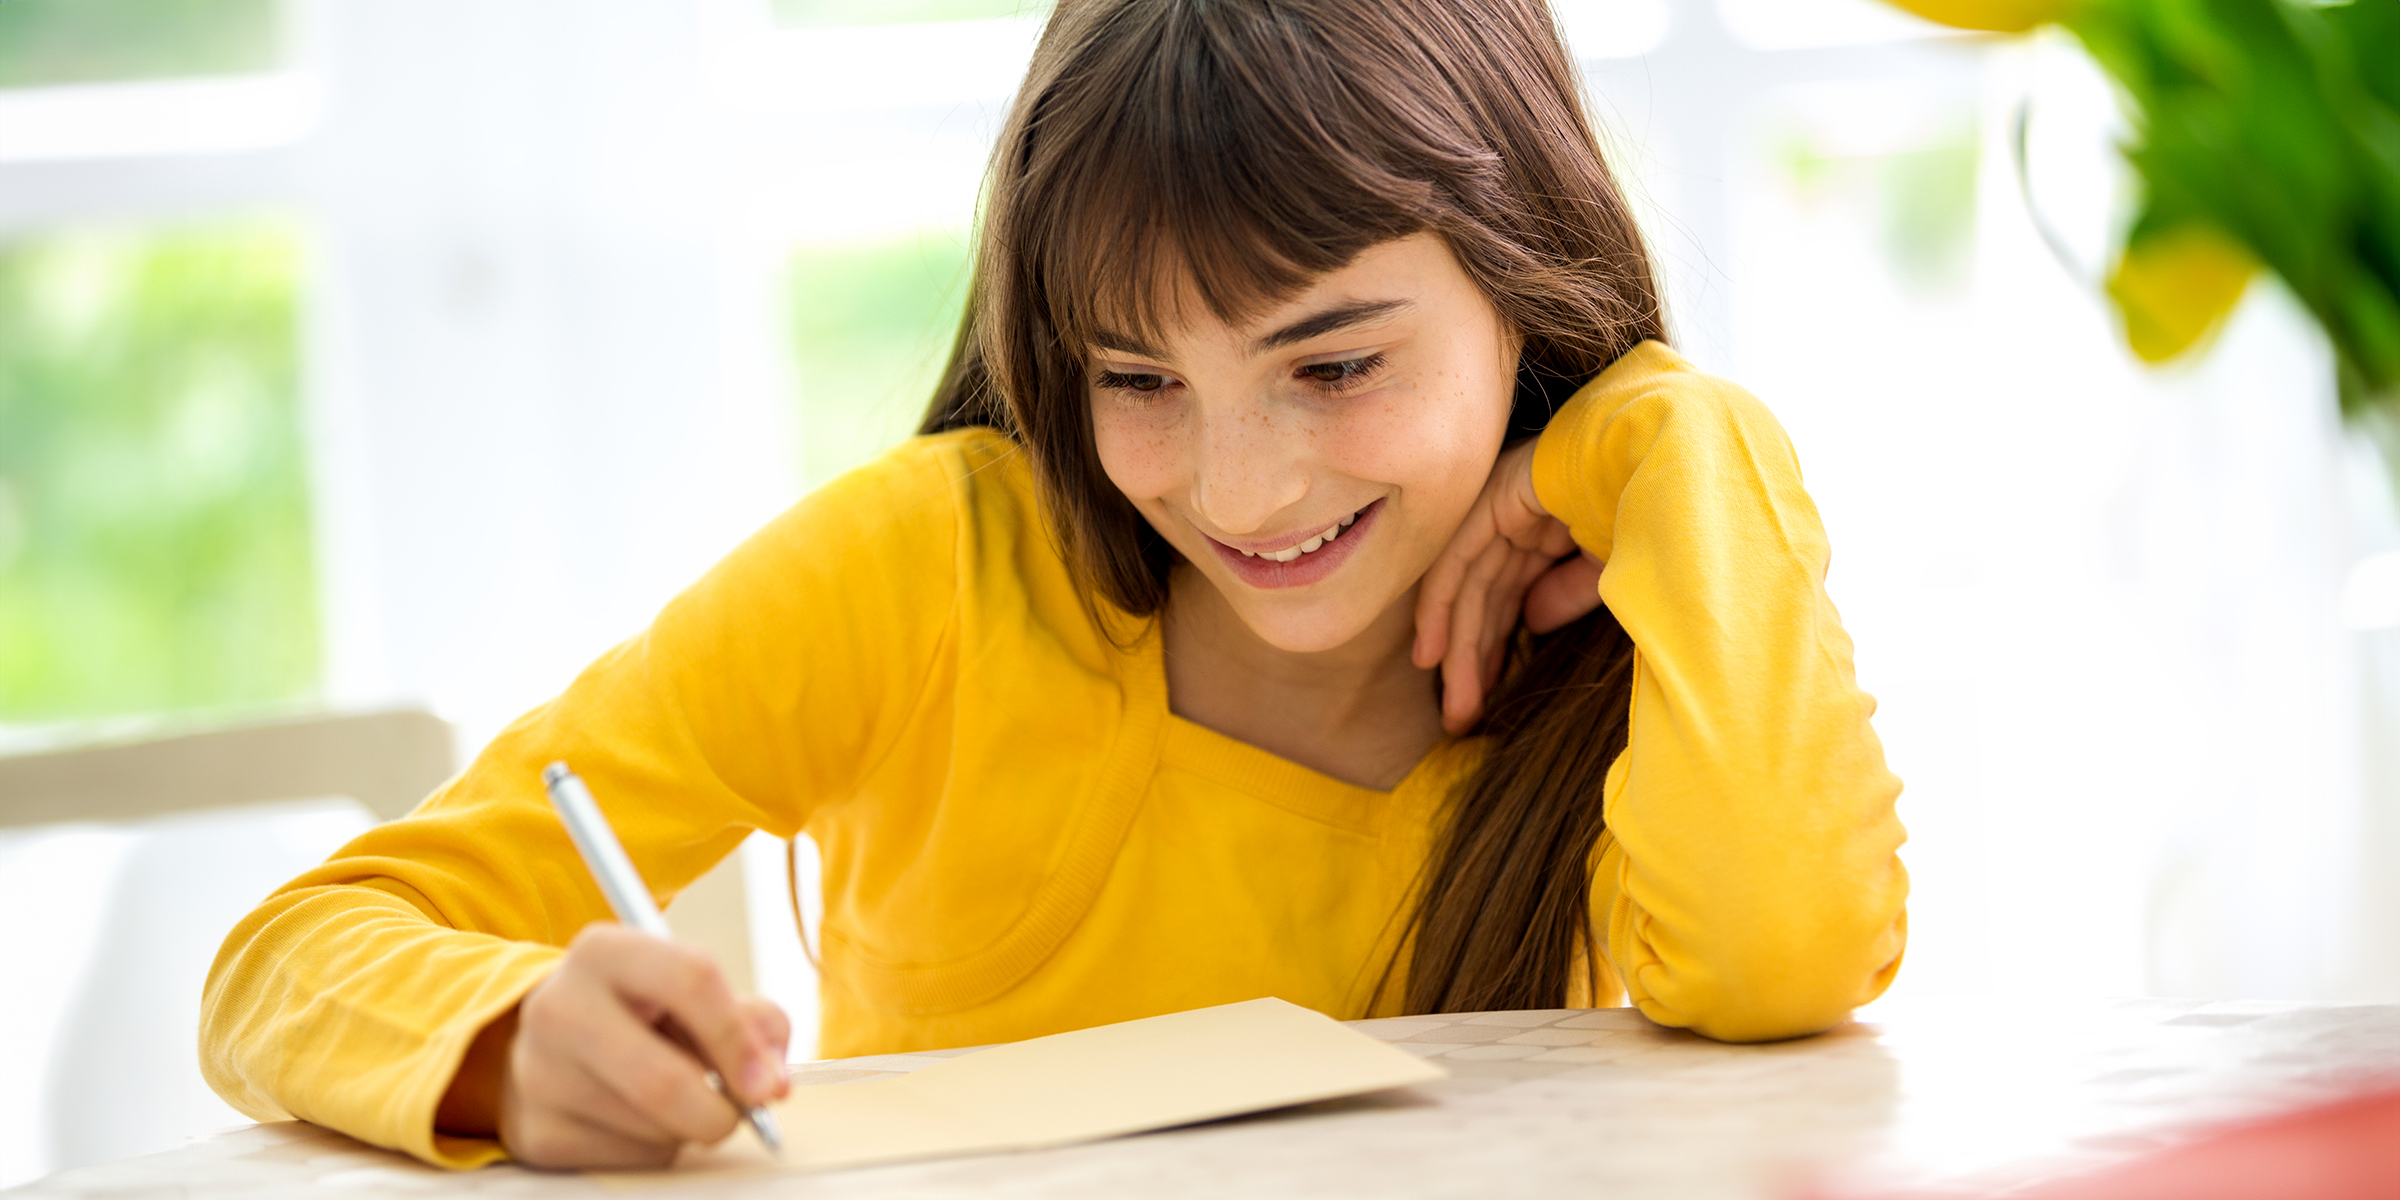 A child writing a letter | Source: Shutterstock